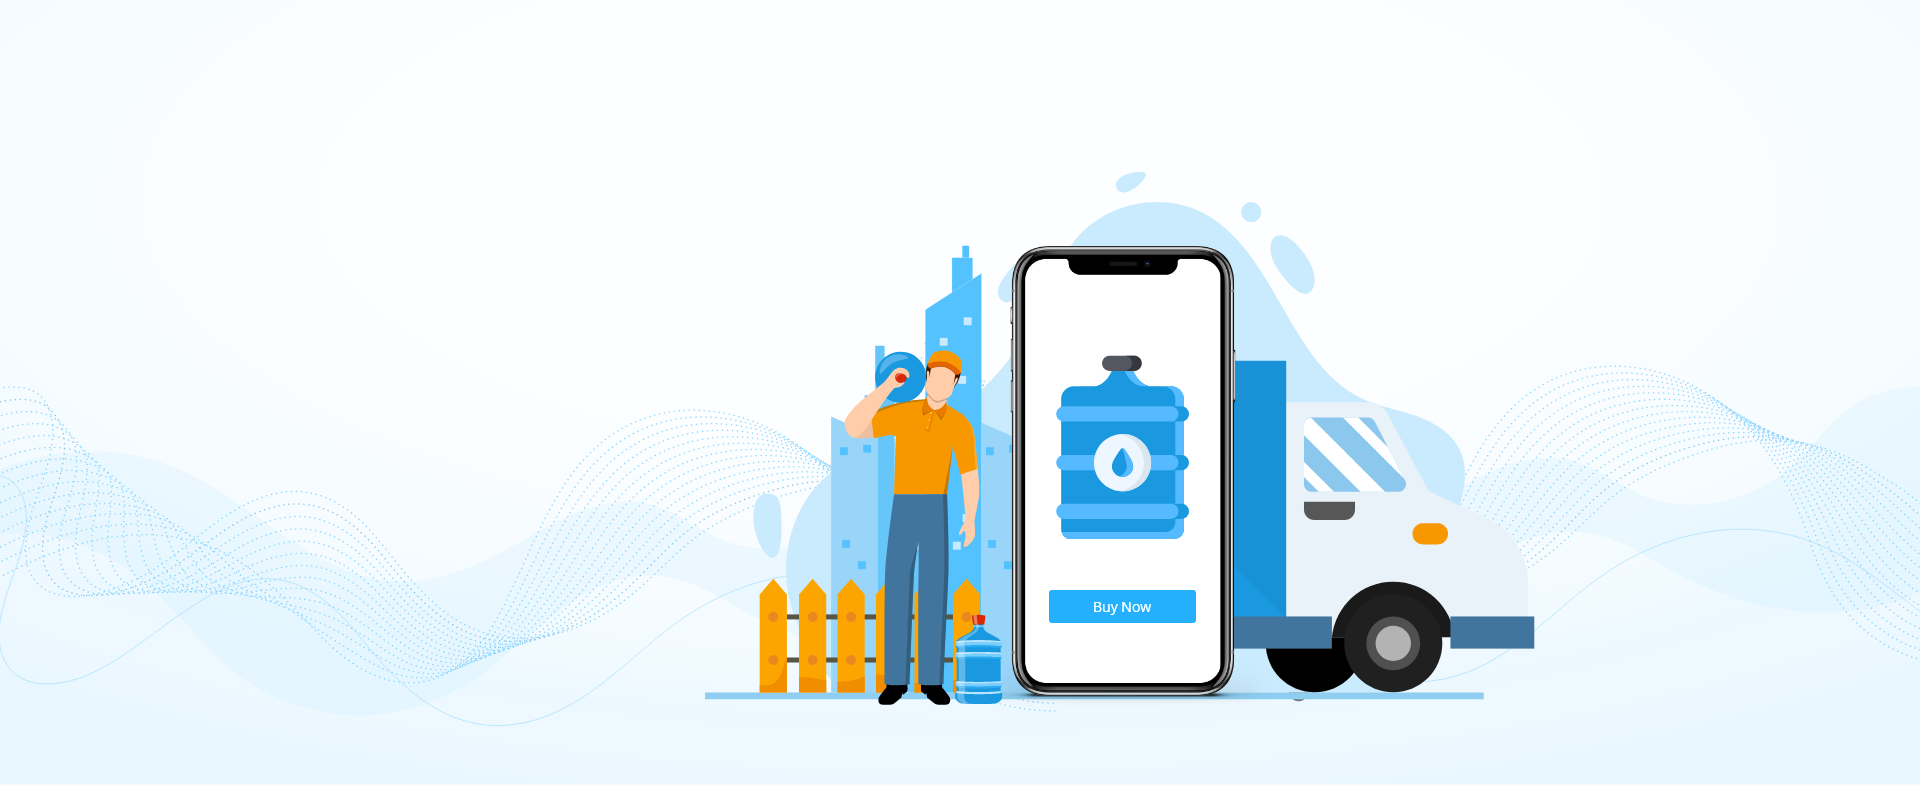 Bottled Water Delivery Software